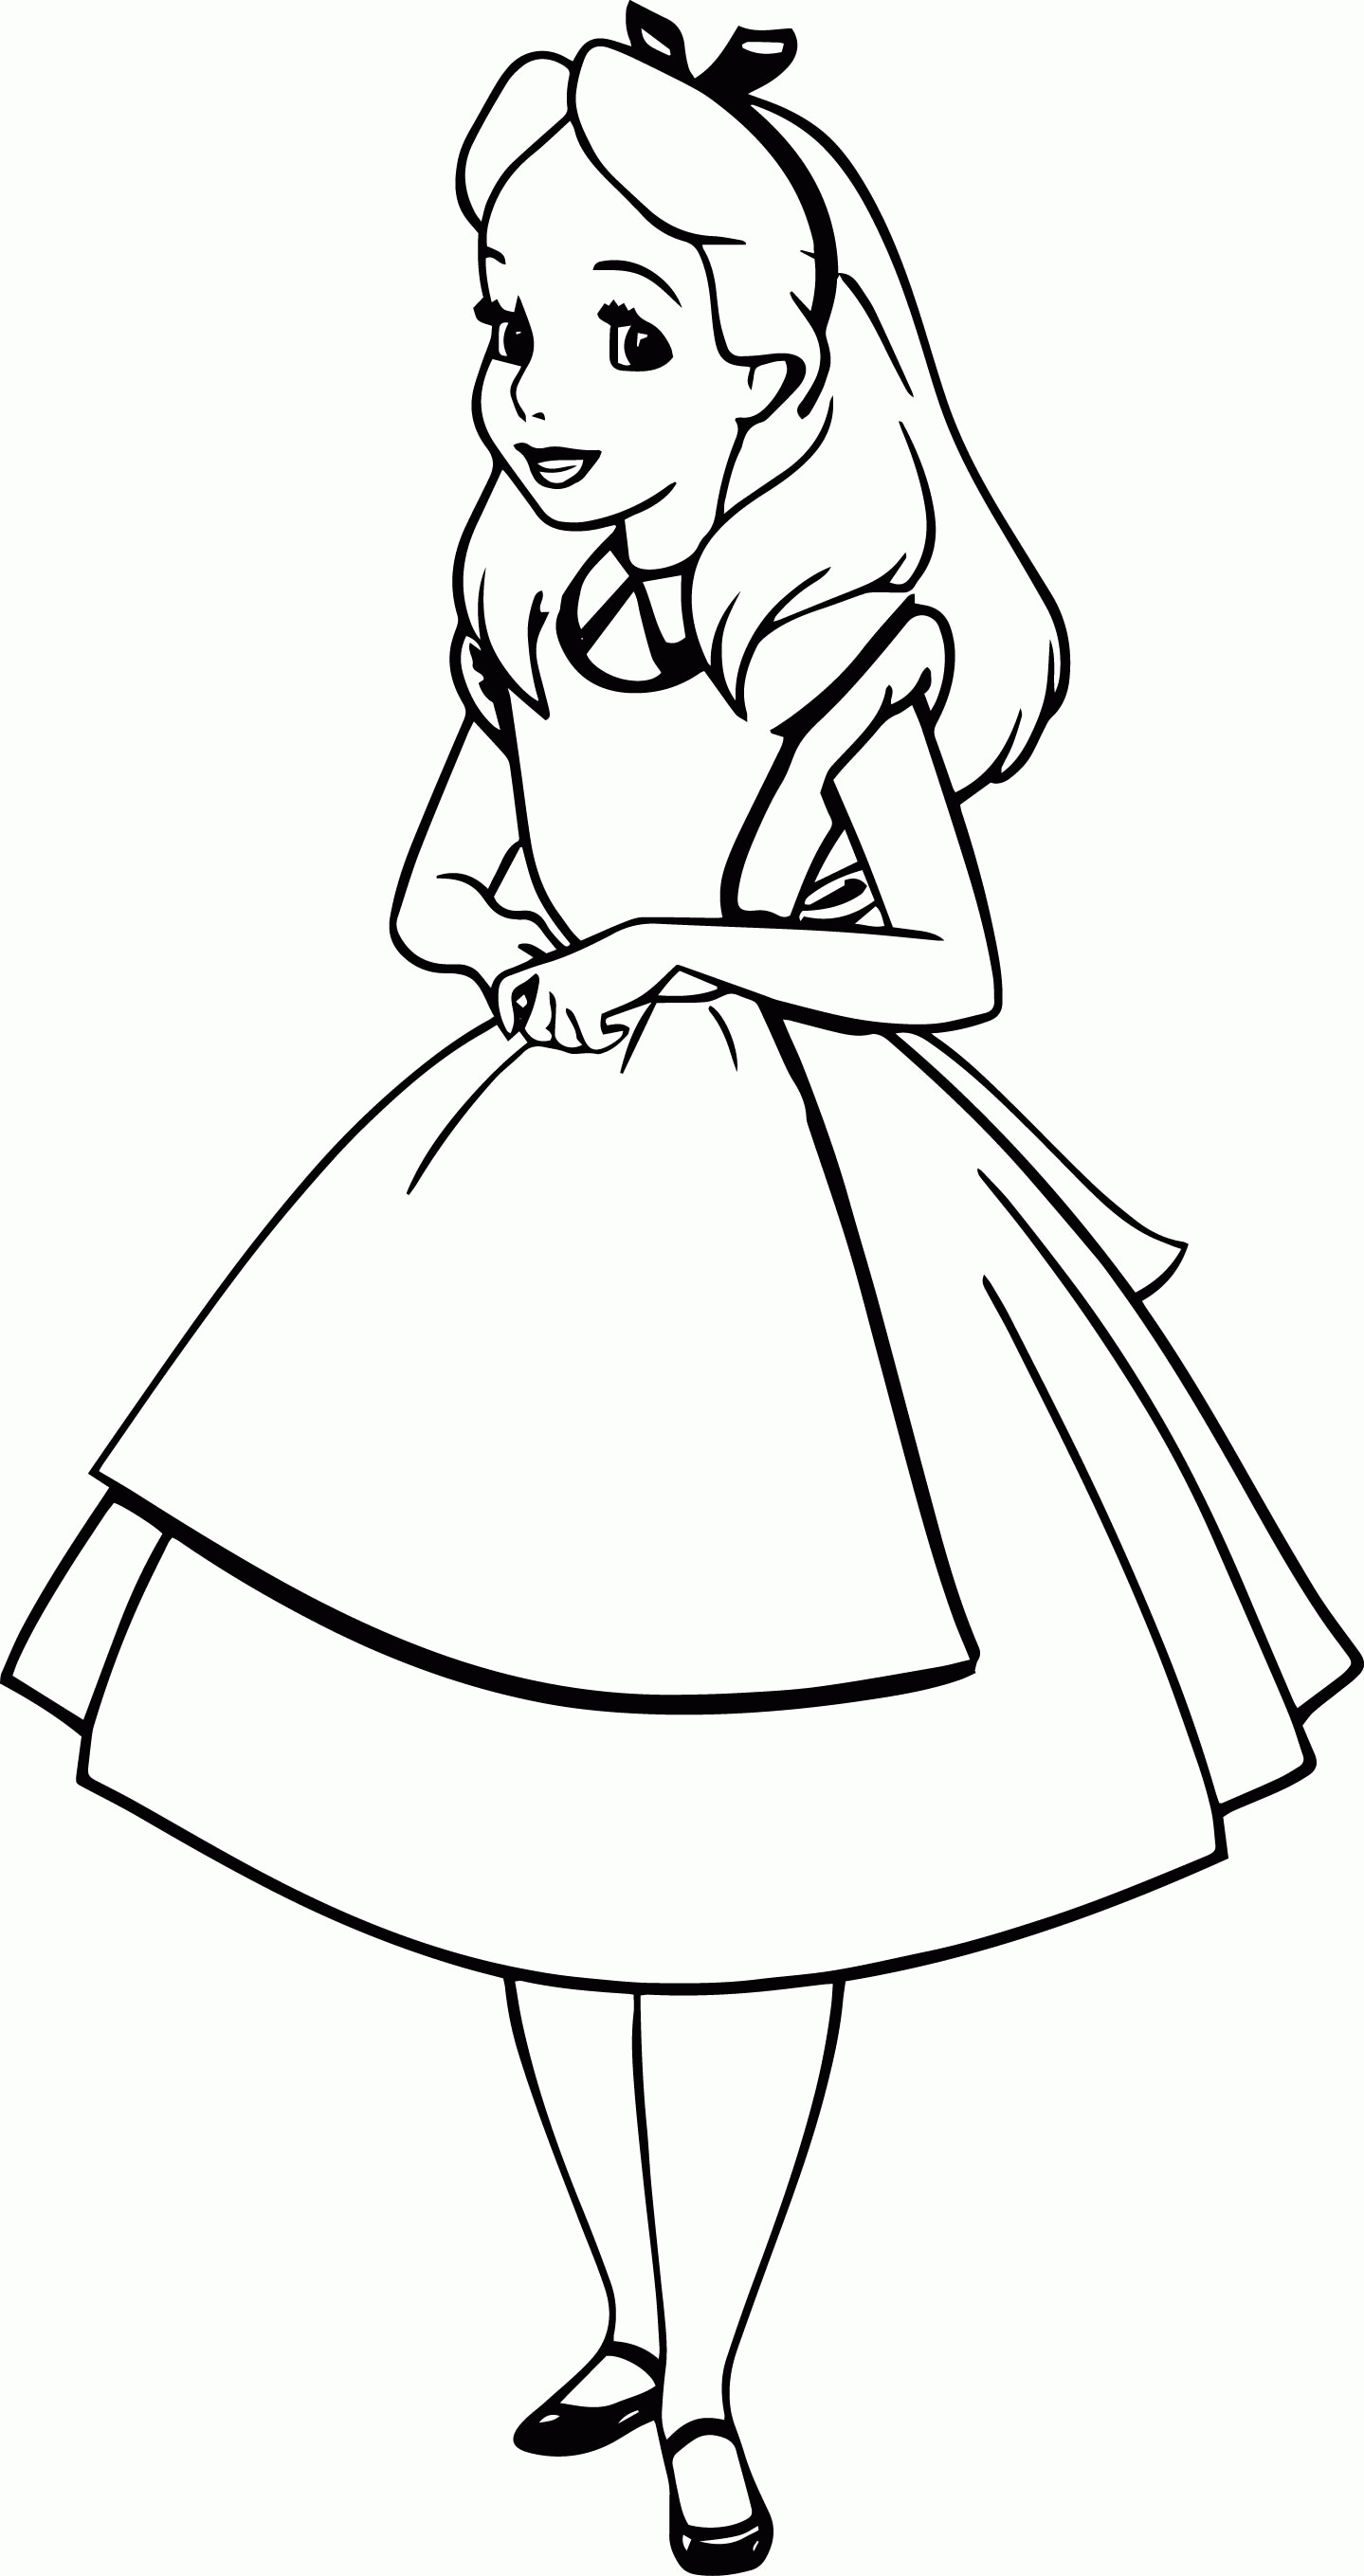 Alice In Wonderland Coloring Page 01 | Wecoloringpage